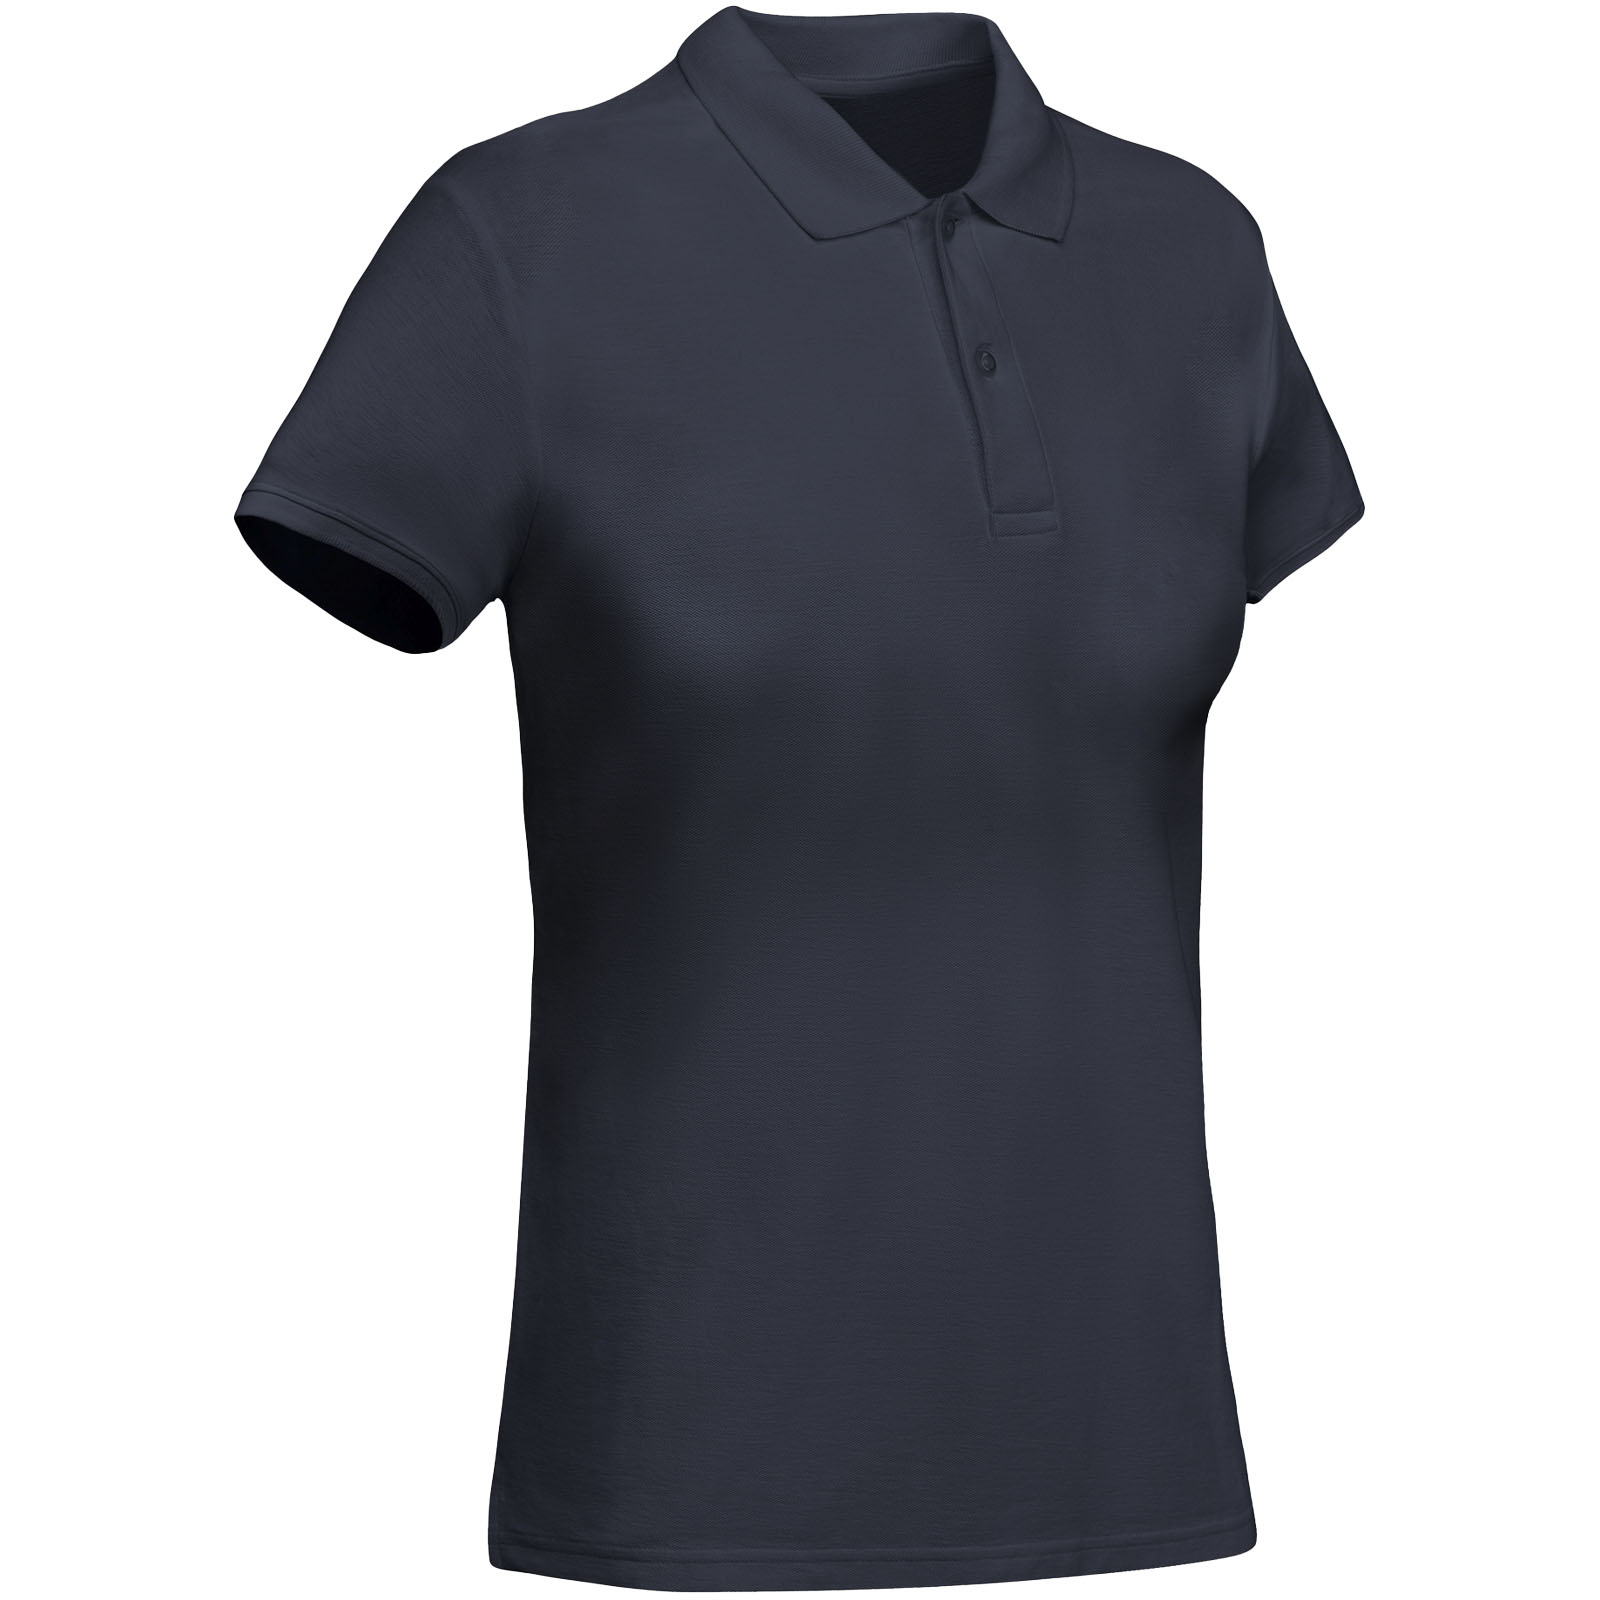 Advertising T-shirts - Prince short sleeve women's polo - 2